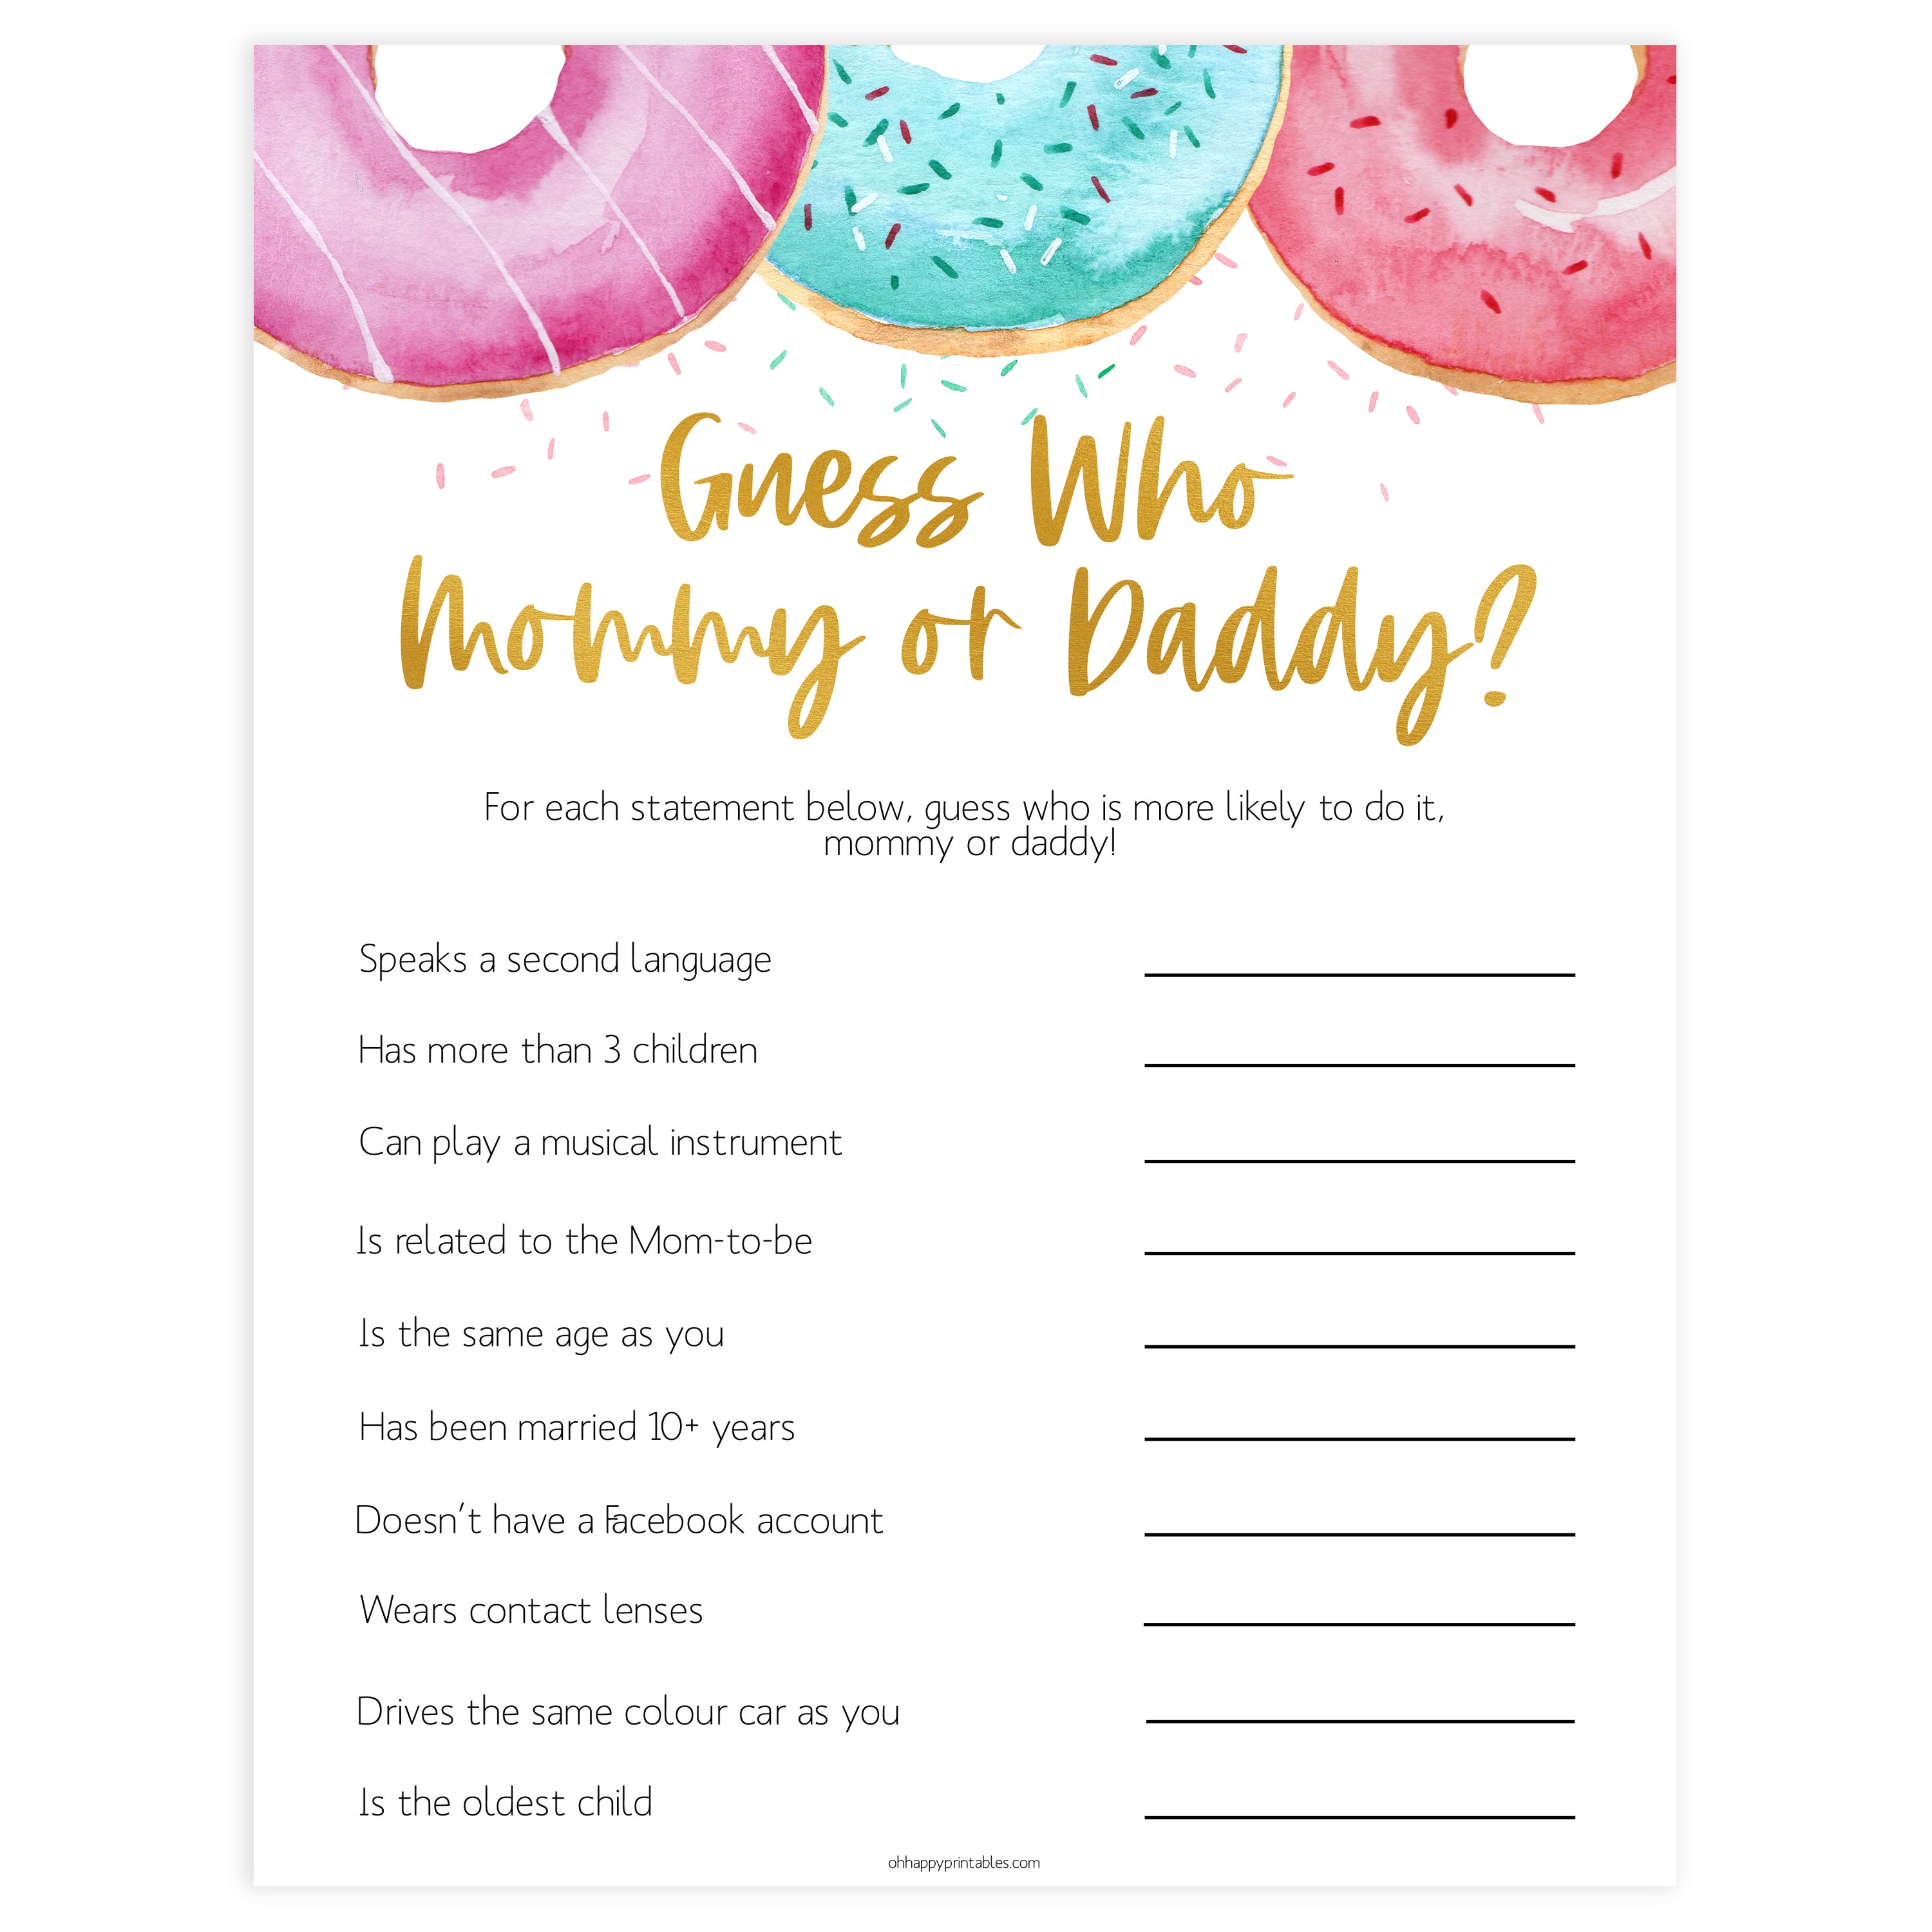 editable baby shower games, guess who mommy or daddy game, Printable baby shower games, donut baby games, baby shower games, fun baby shower ideas, top baby shower ideas, donut sprinkles baby shower, baby shower games, fun donut baby shower ideas